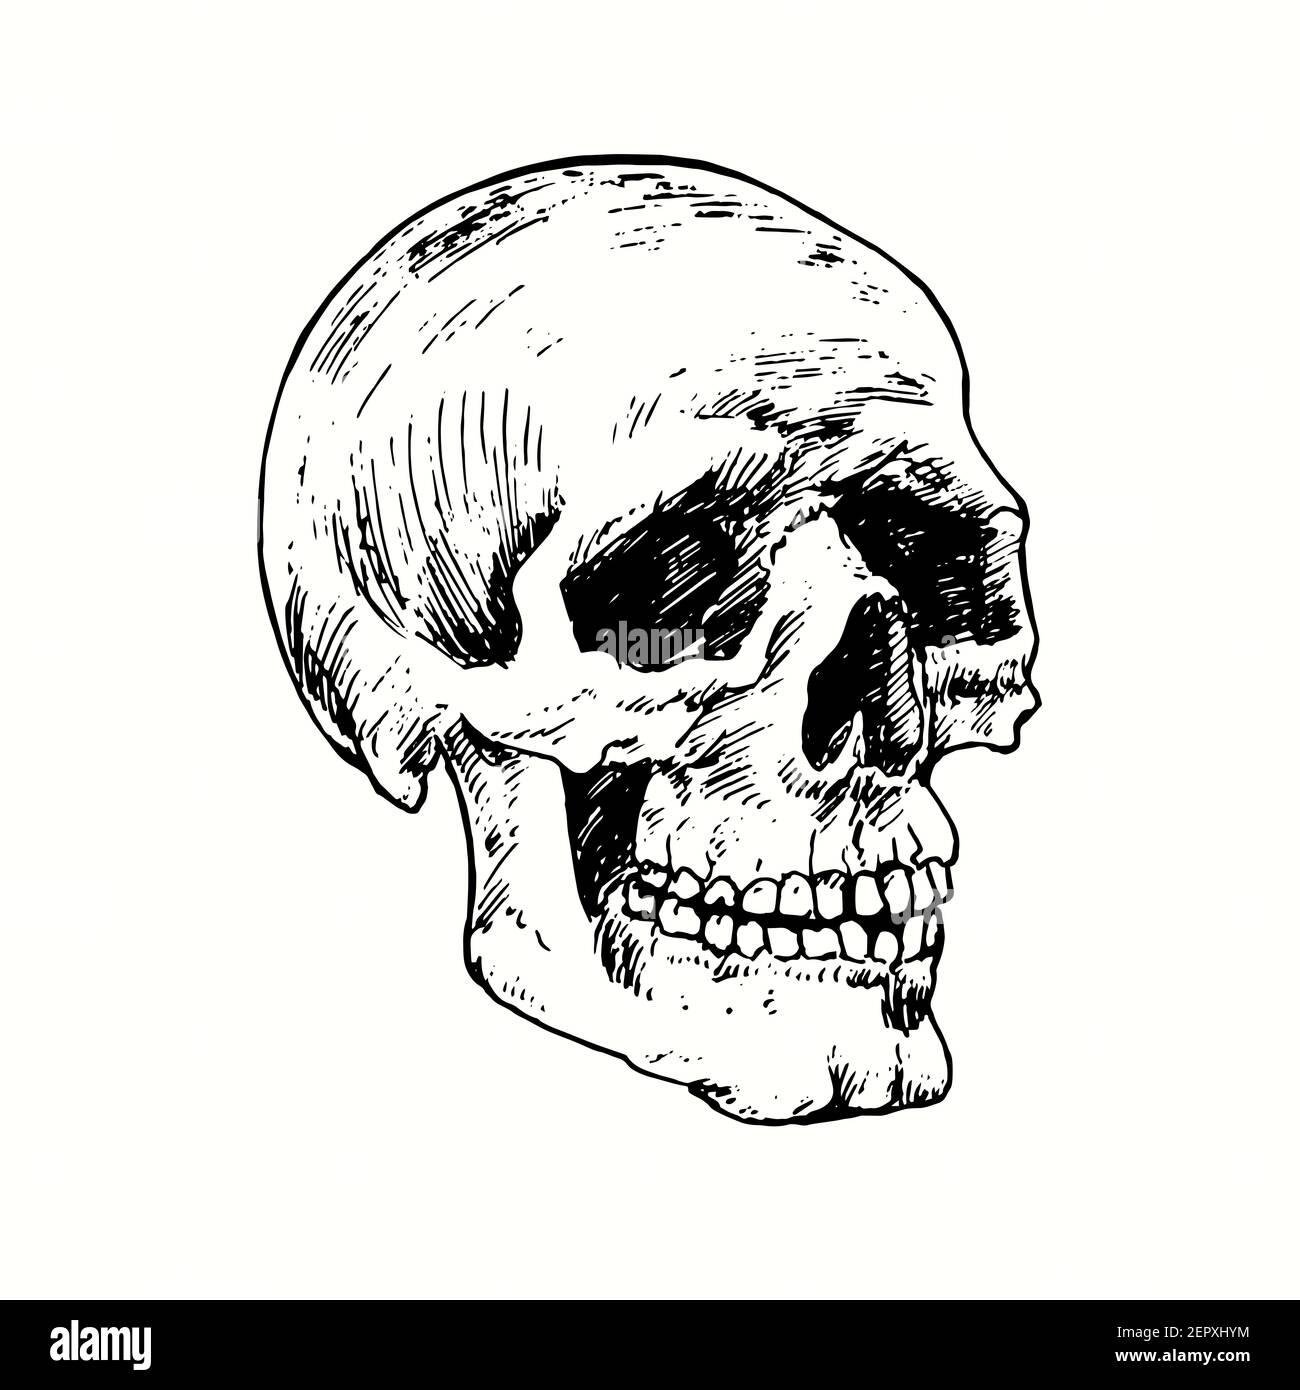 Skull face, side view. Ink black and white drawing. Stock Photo